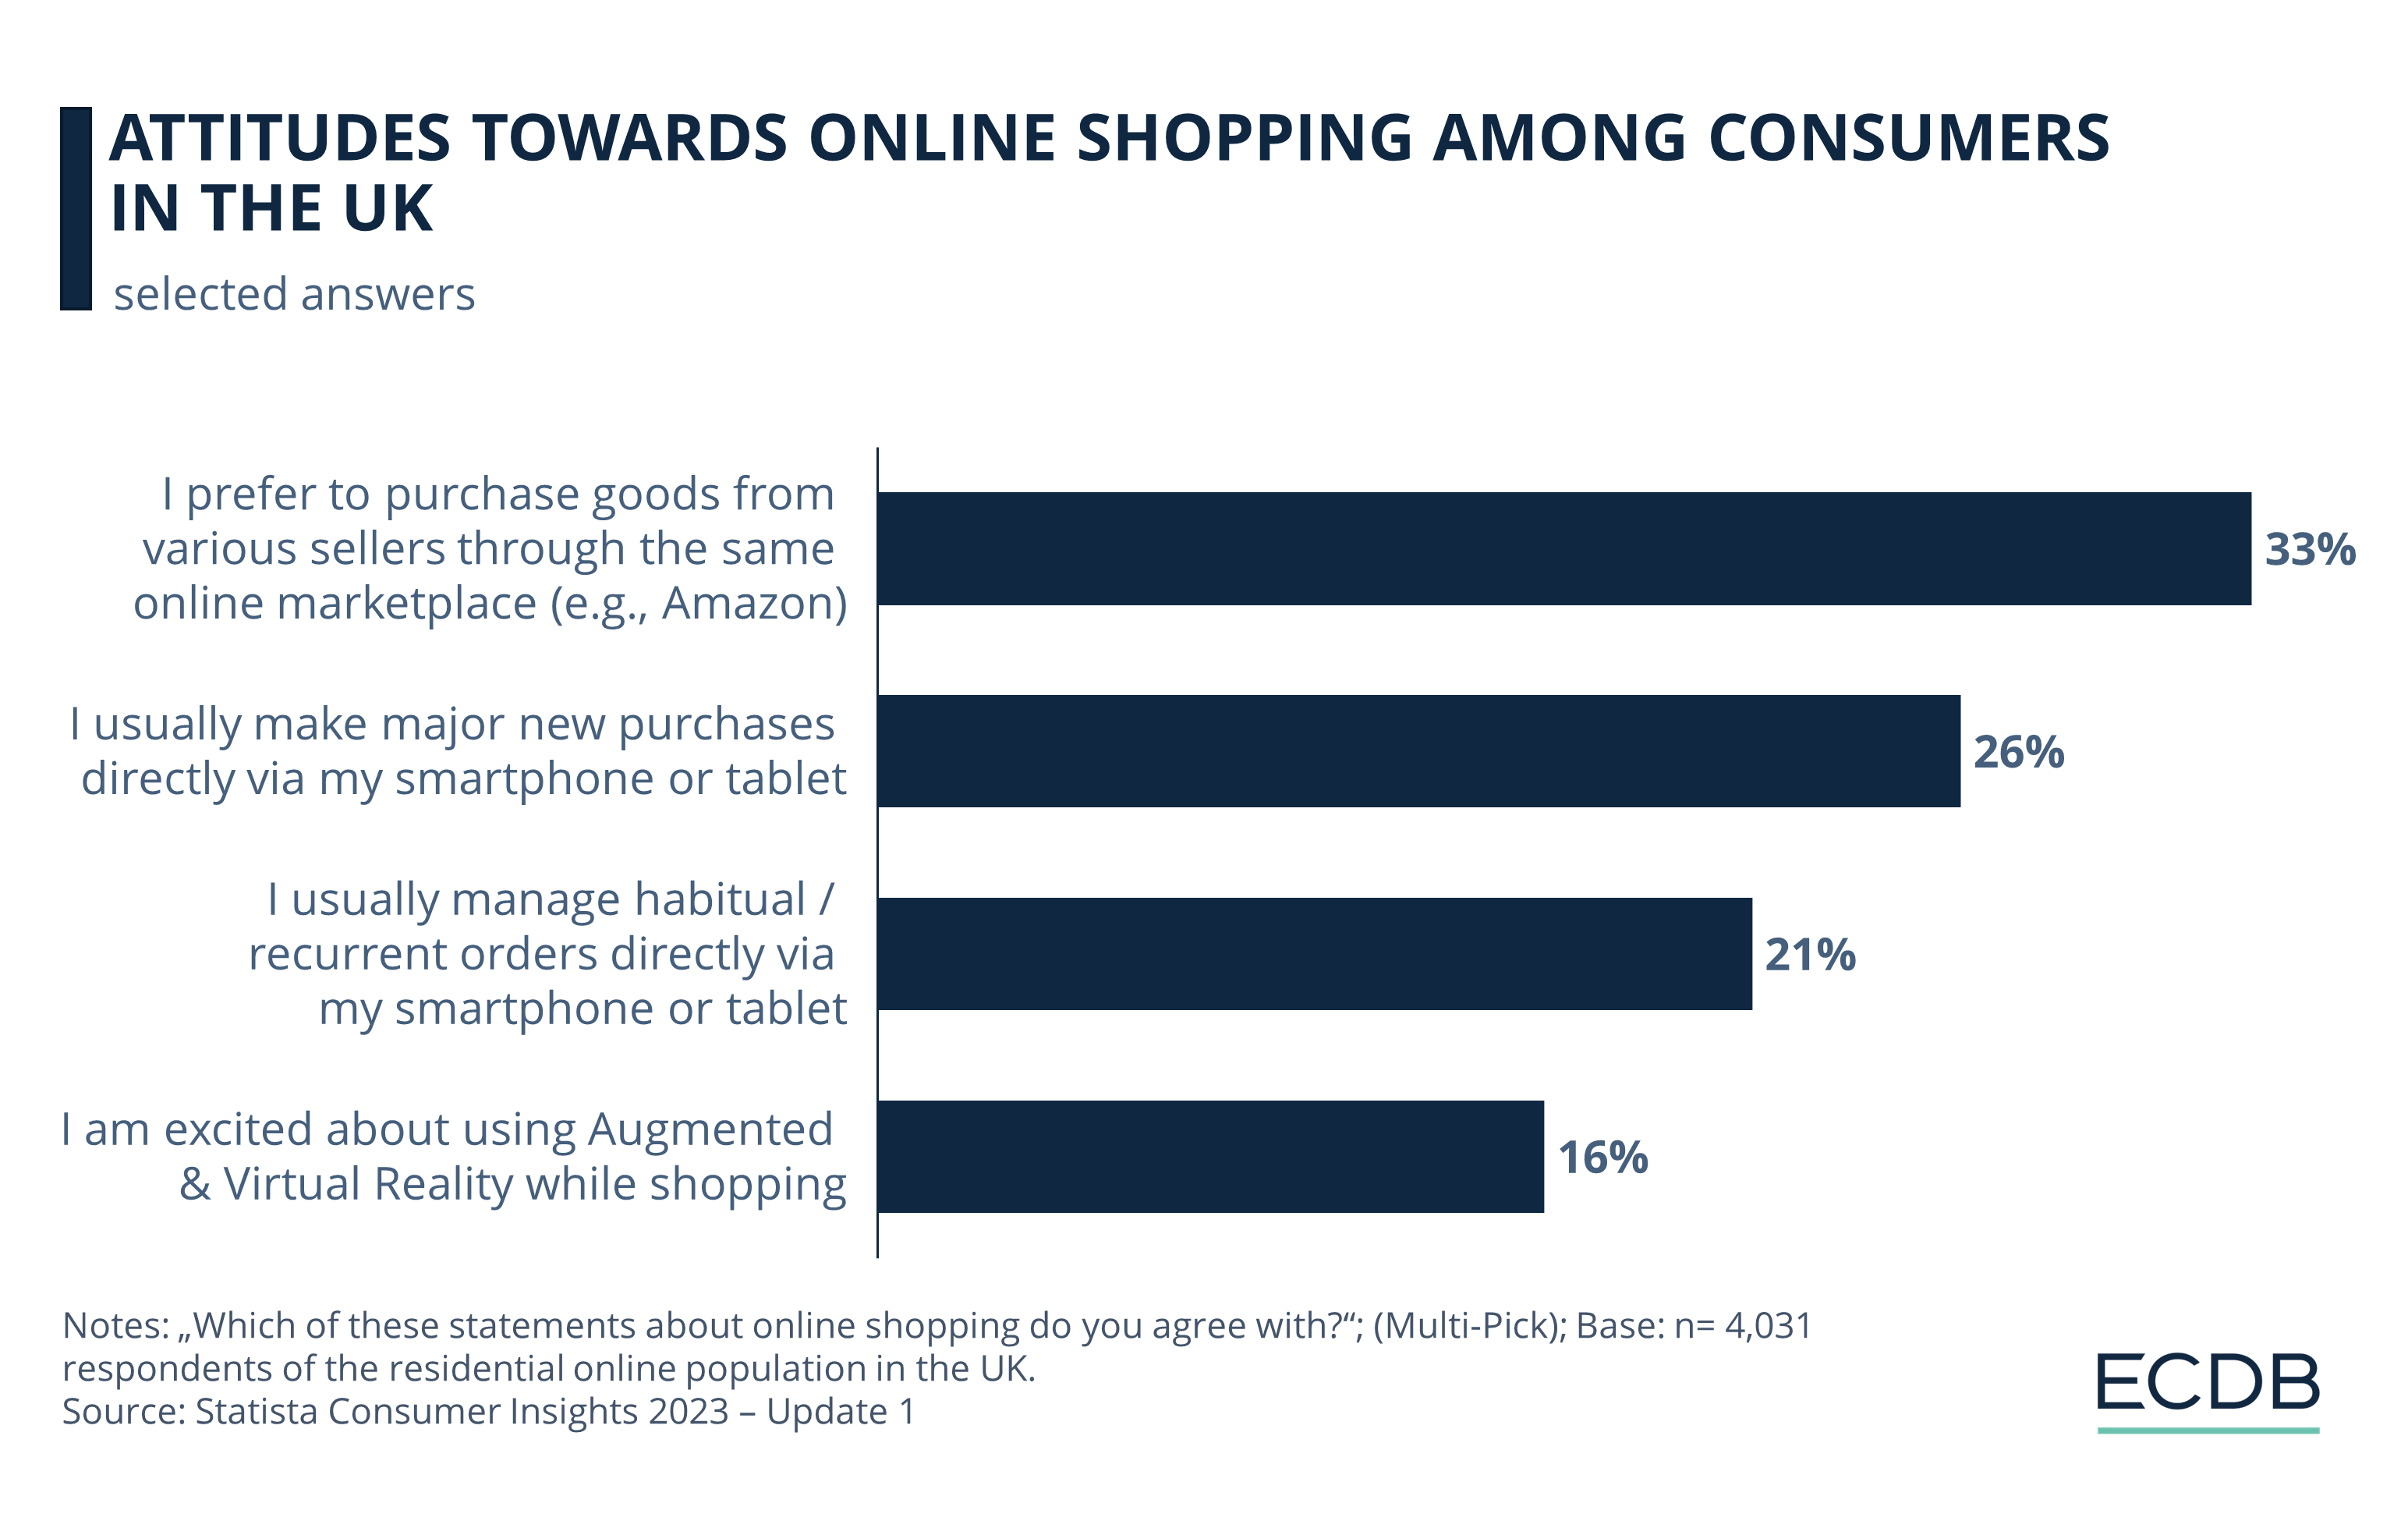 How the  Marketplace is Changing the eCommerce Landscape